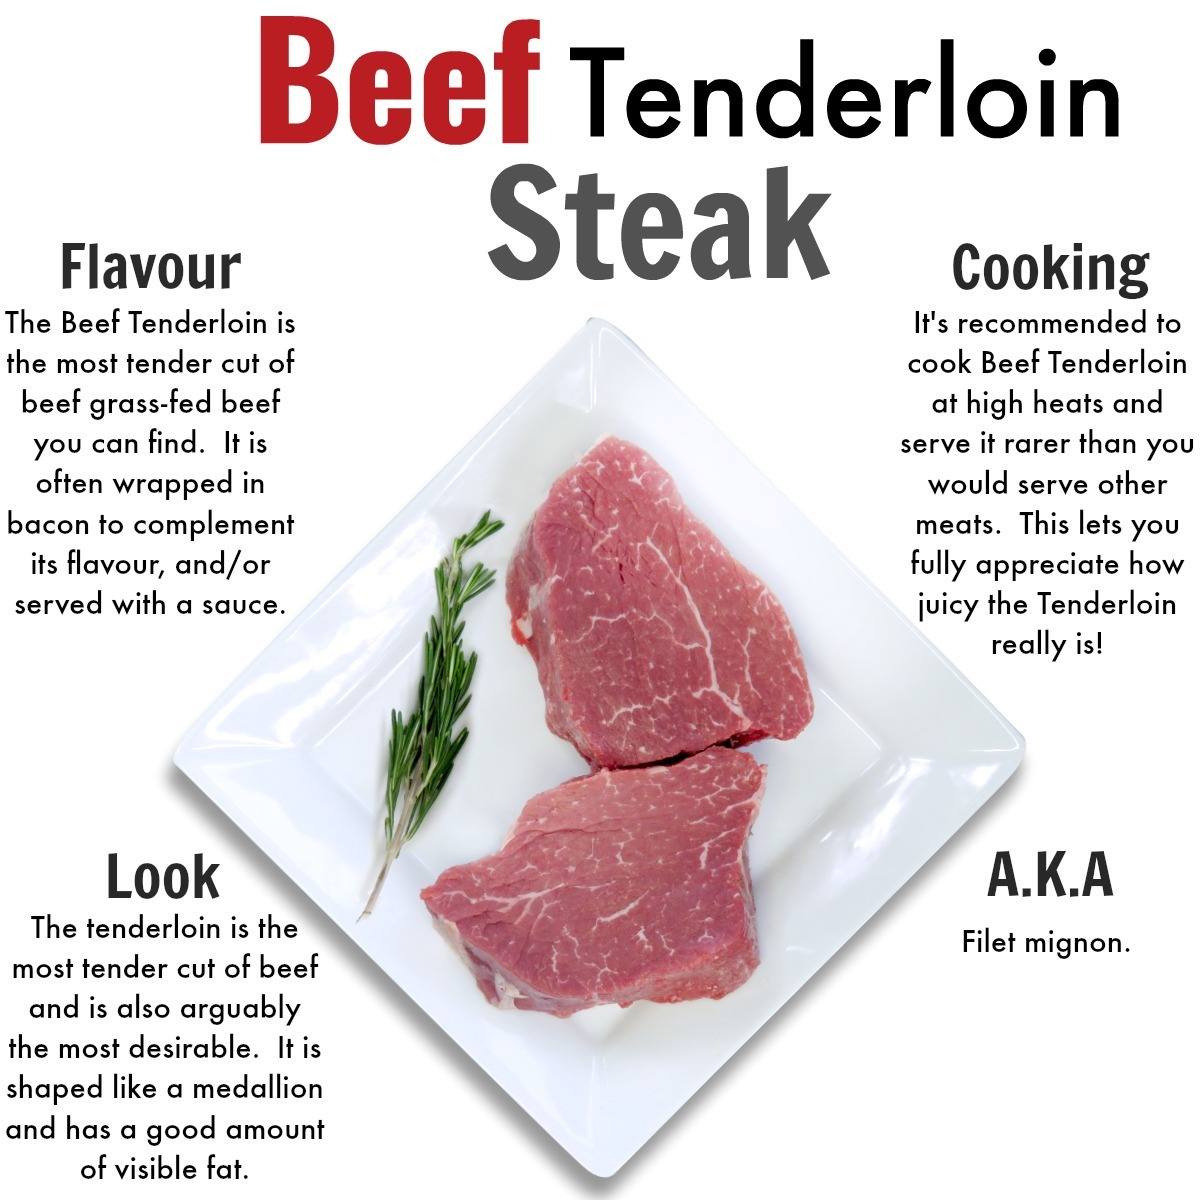 Affordable grass-fed beef delivery near me, steaks, ground beef and more - Nutrafams - Beef Tenderloin Steak 2